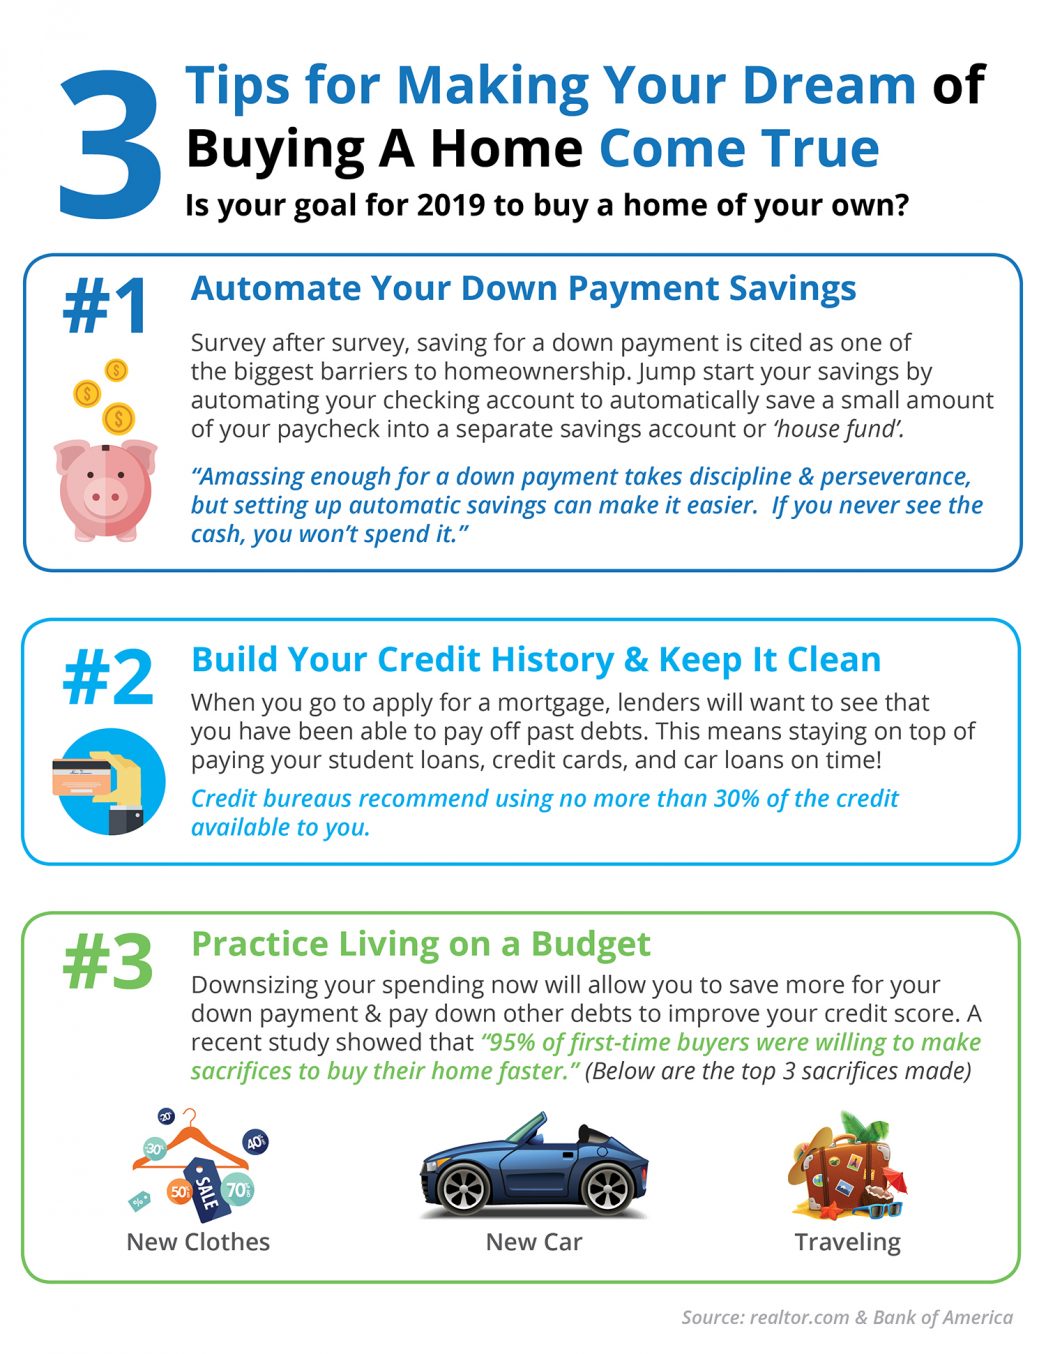 Essential First Time Home Buyer Tips for a Smooth Mortgage Journey -  thatneongirl